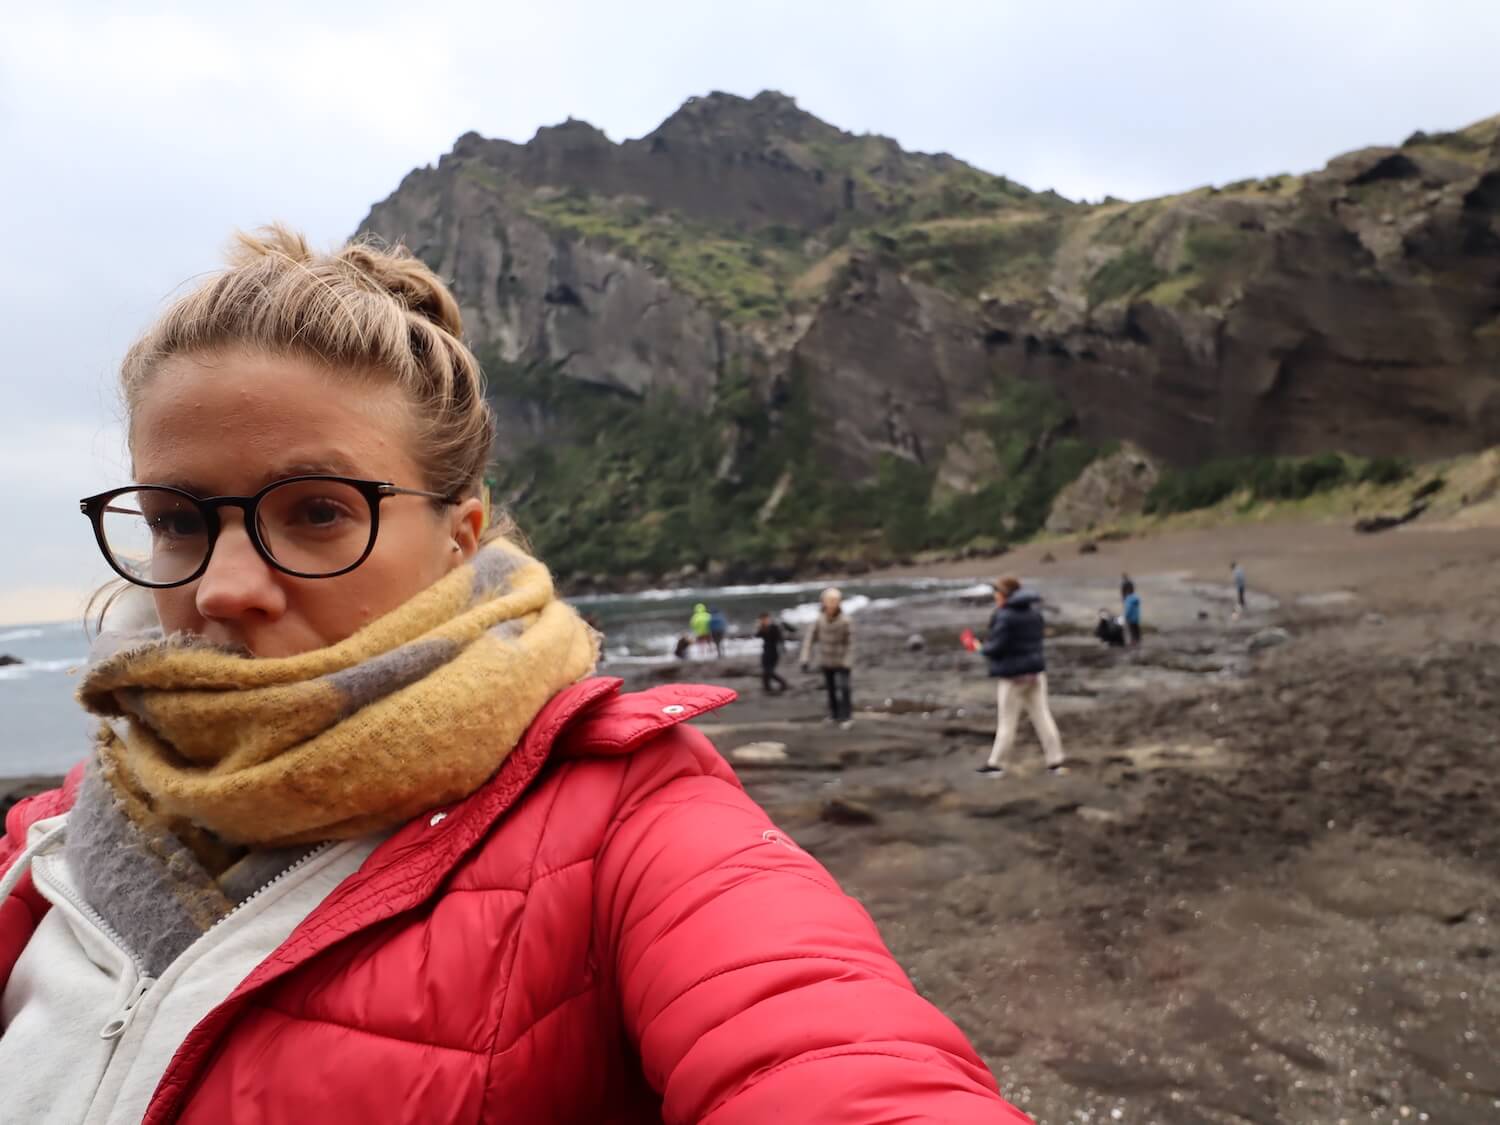 How to Spend 4 Days Travelling Solo in Jeju Island, South Korea